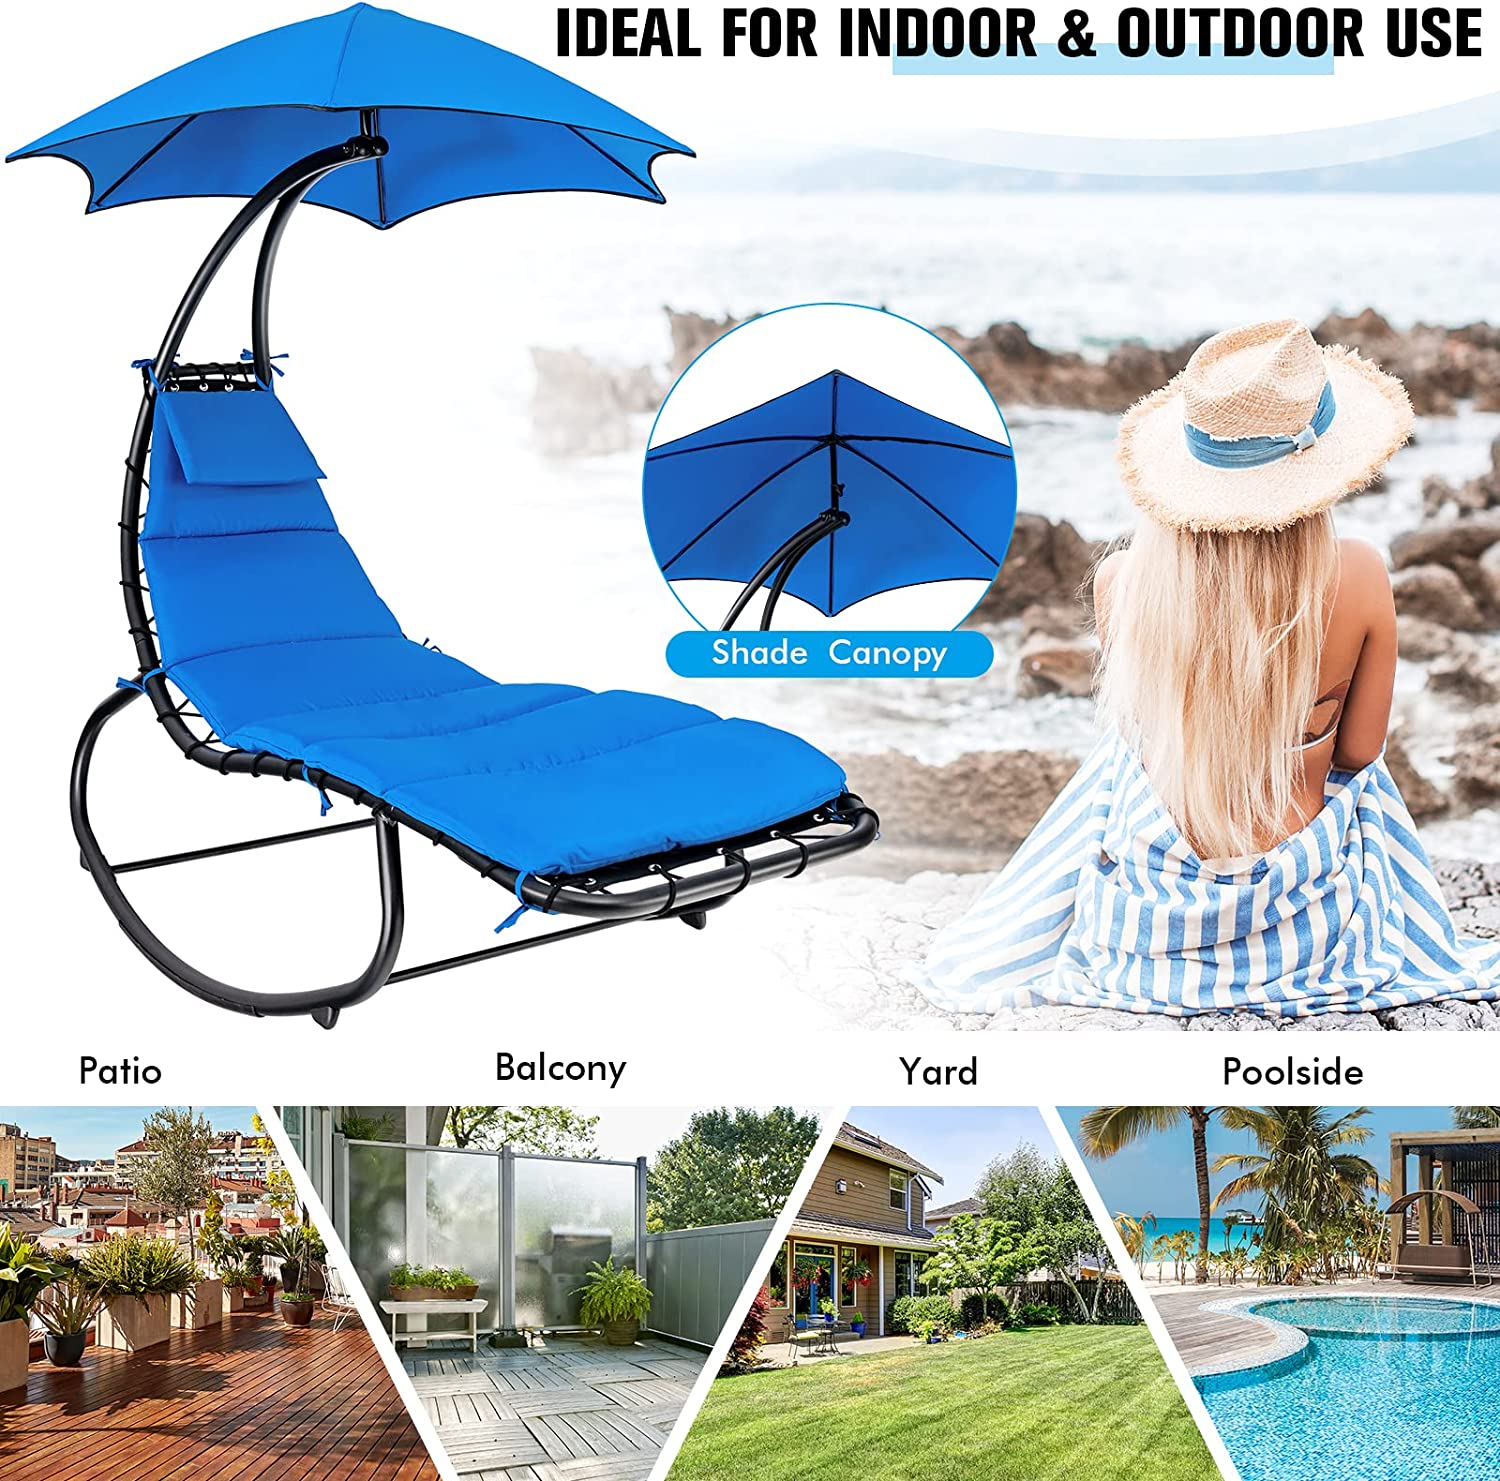 Chairliving Outdoor Hammock Chair Swing Lounger Patio Chaise Lounge Hanging Chair with Shade Canopy Full-Padded Cushion